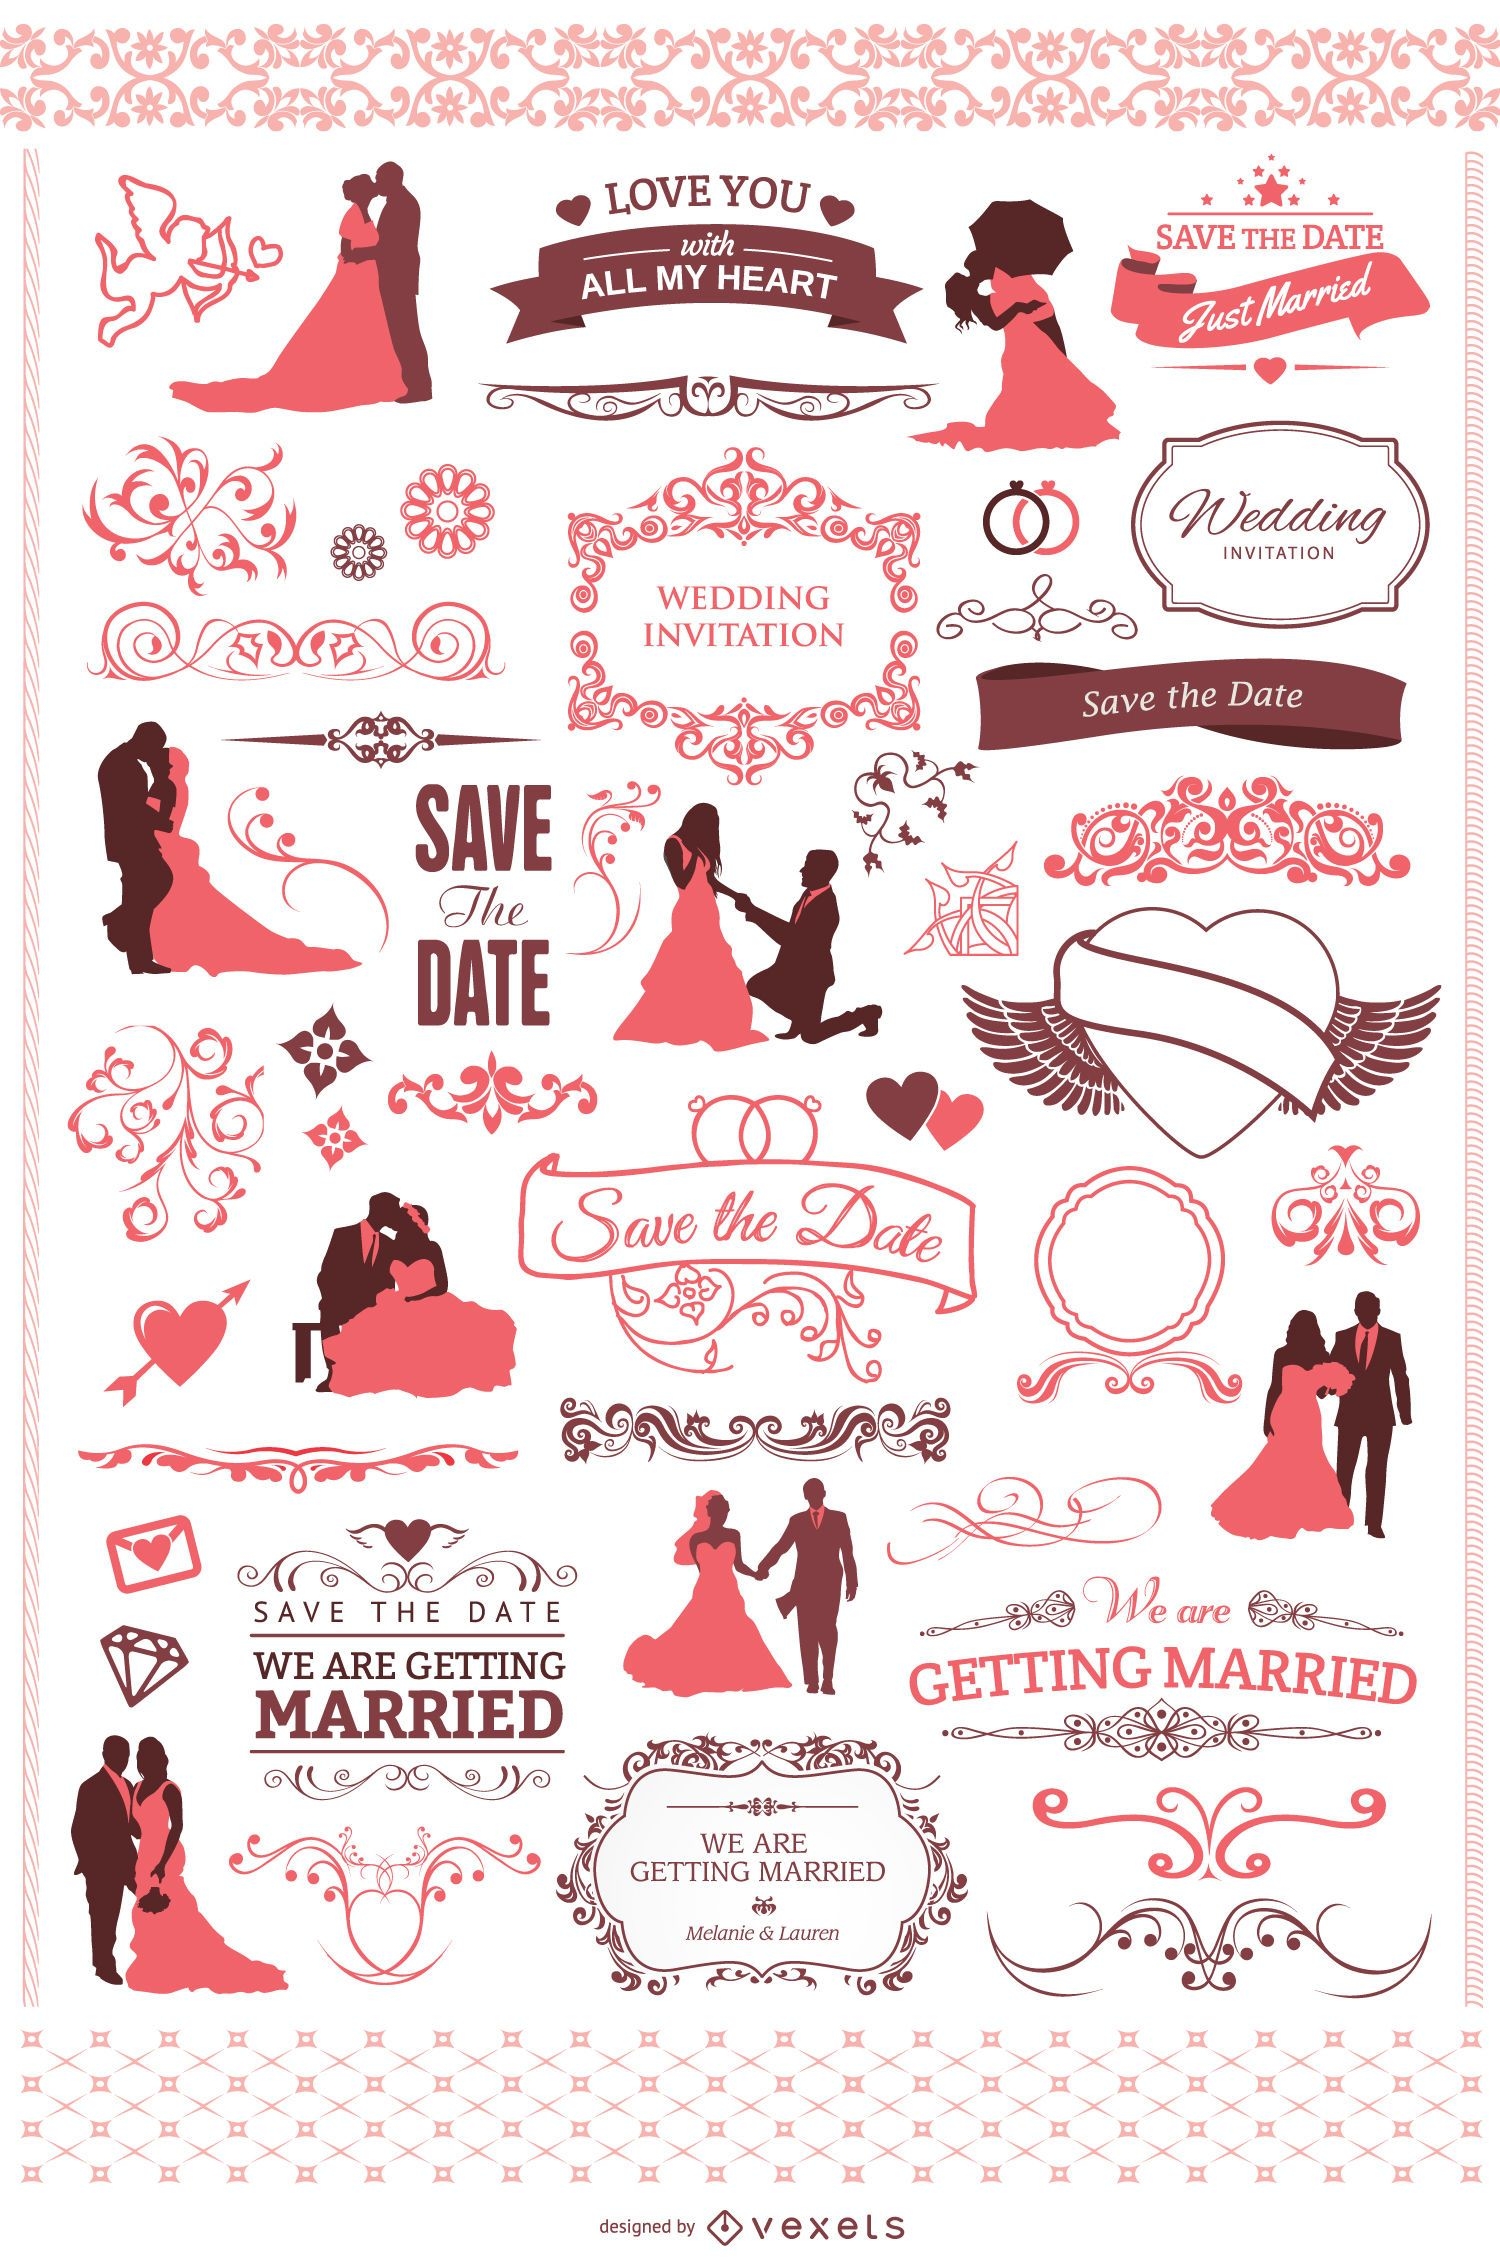 60 Cool wedding elements for your invitation